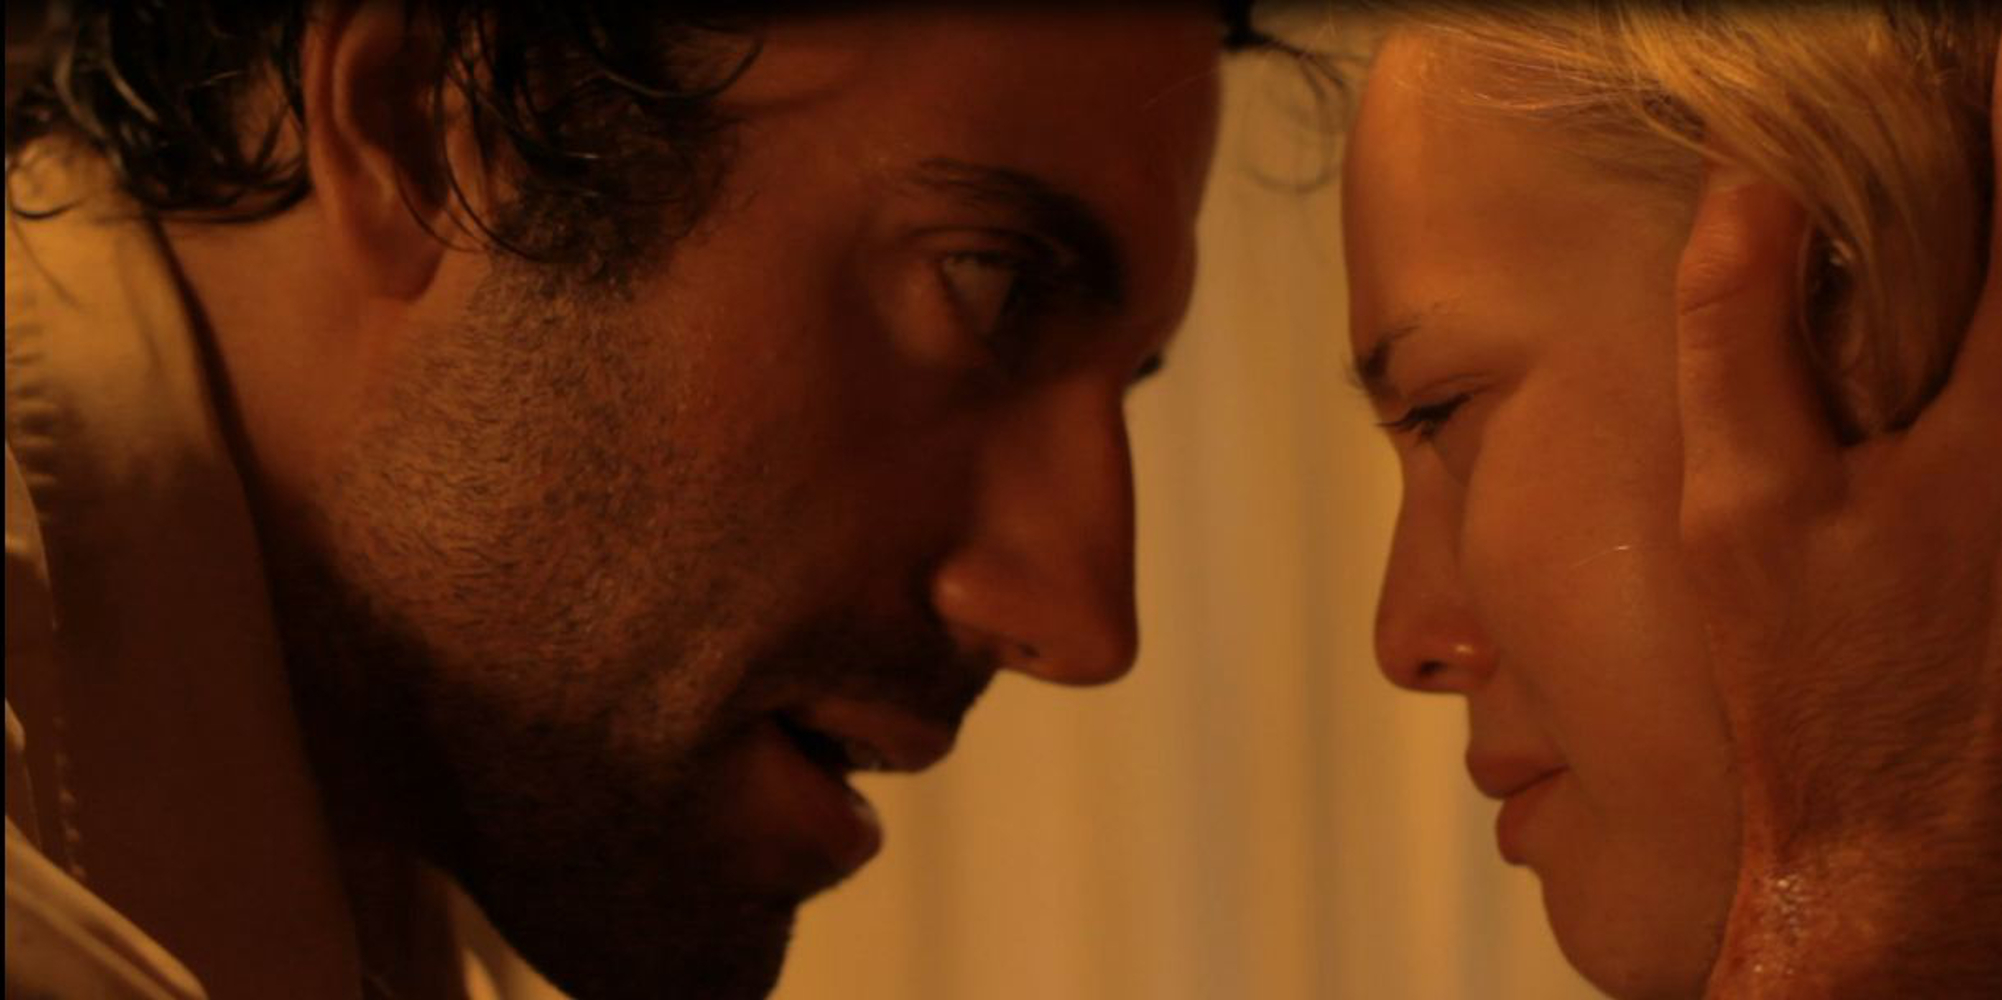 Daniel Van Thomas and Jordan Elizabeth Goettling in Revelation Trail from Entertainment One and Living End Productions (2014)